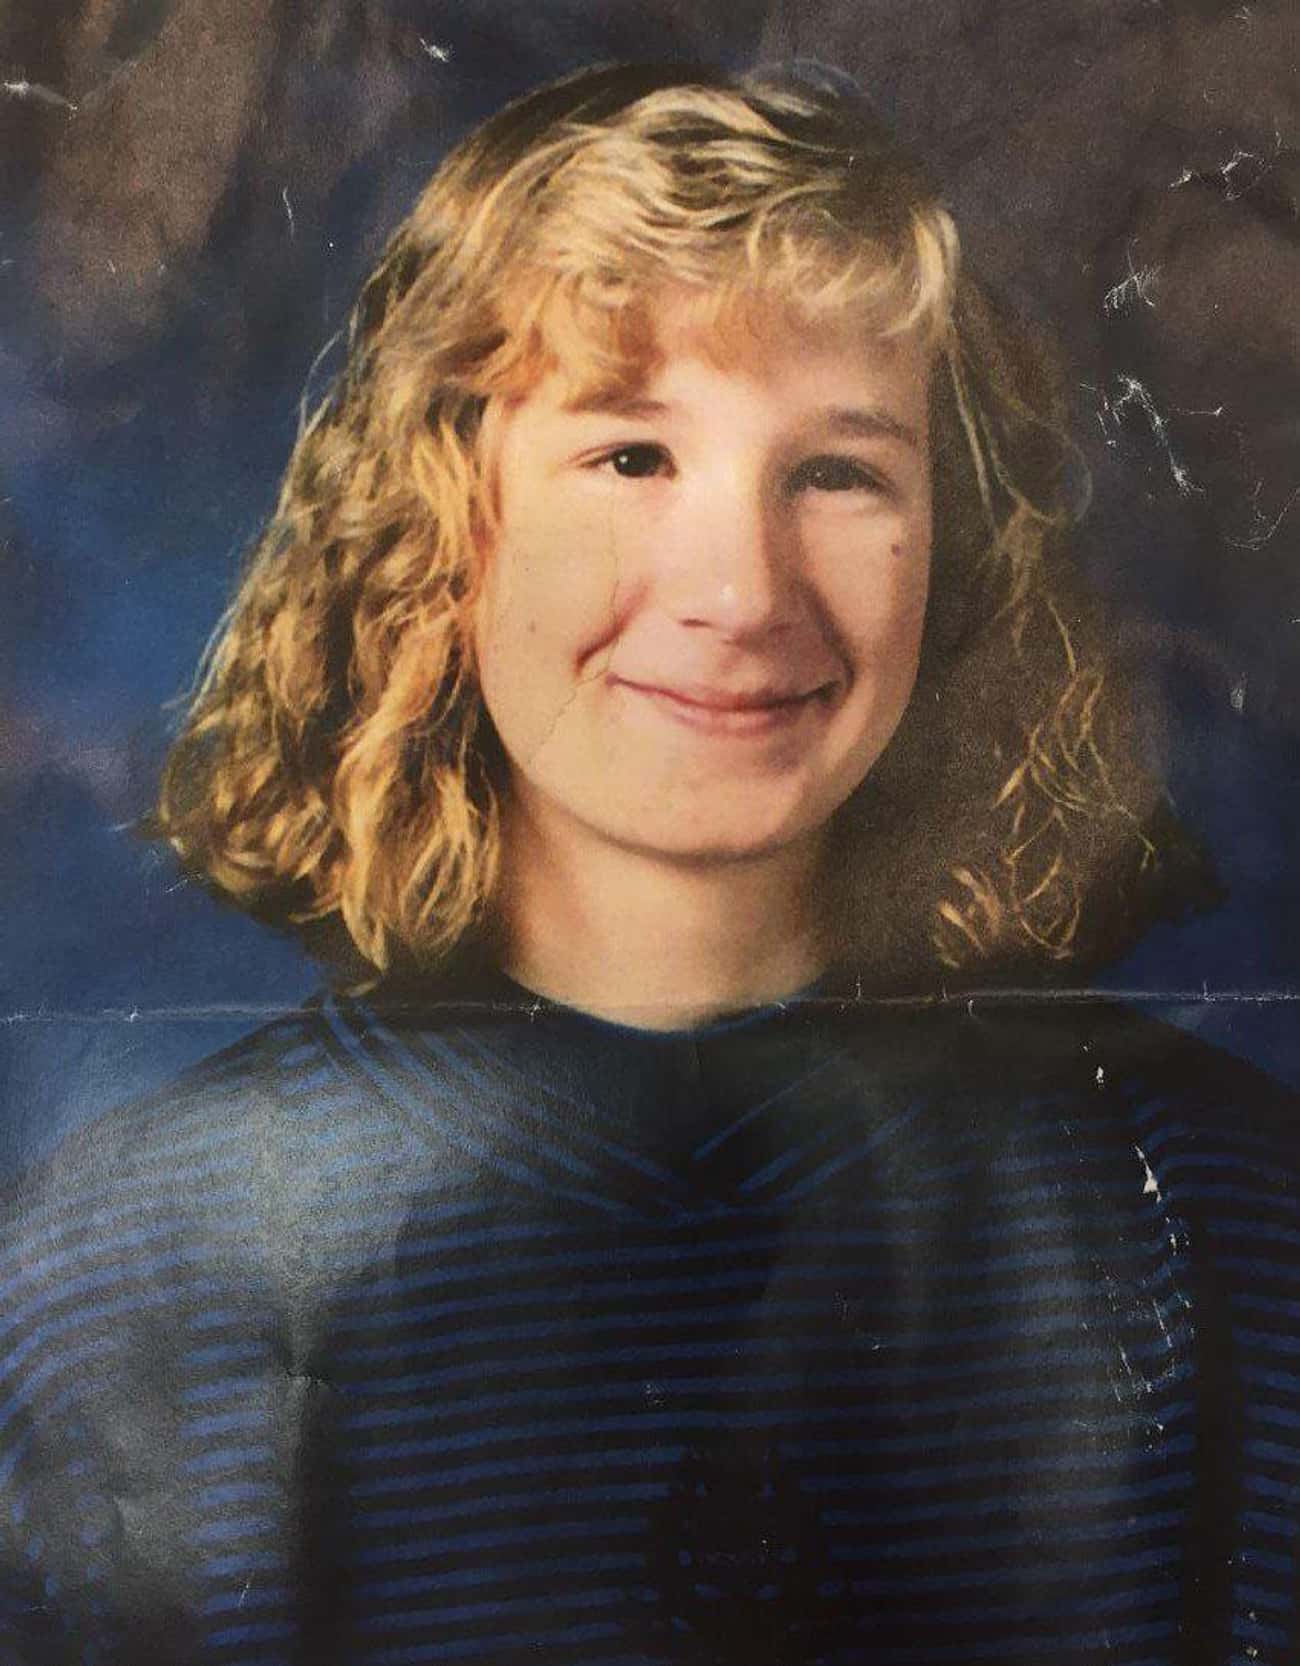 On September 17, 1992, 14-Year-Old Misty Copsey Vanished From The Washington State Fair In Puyallup, WA